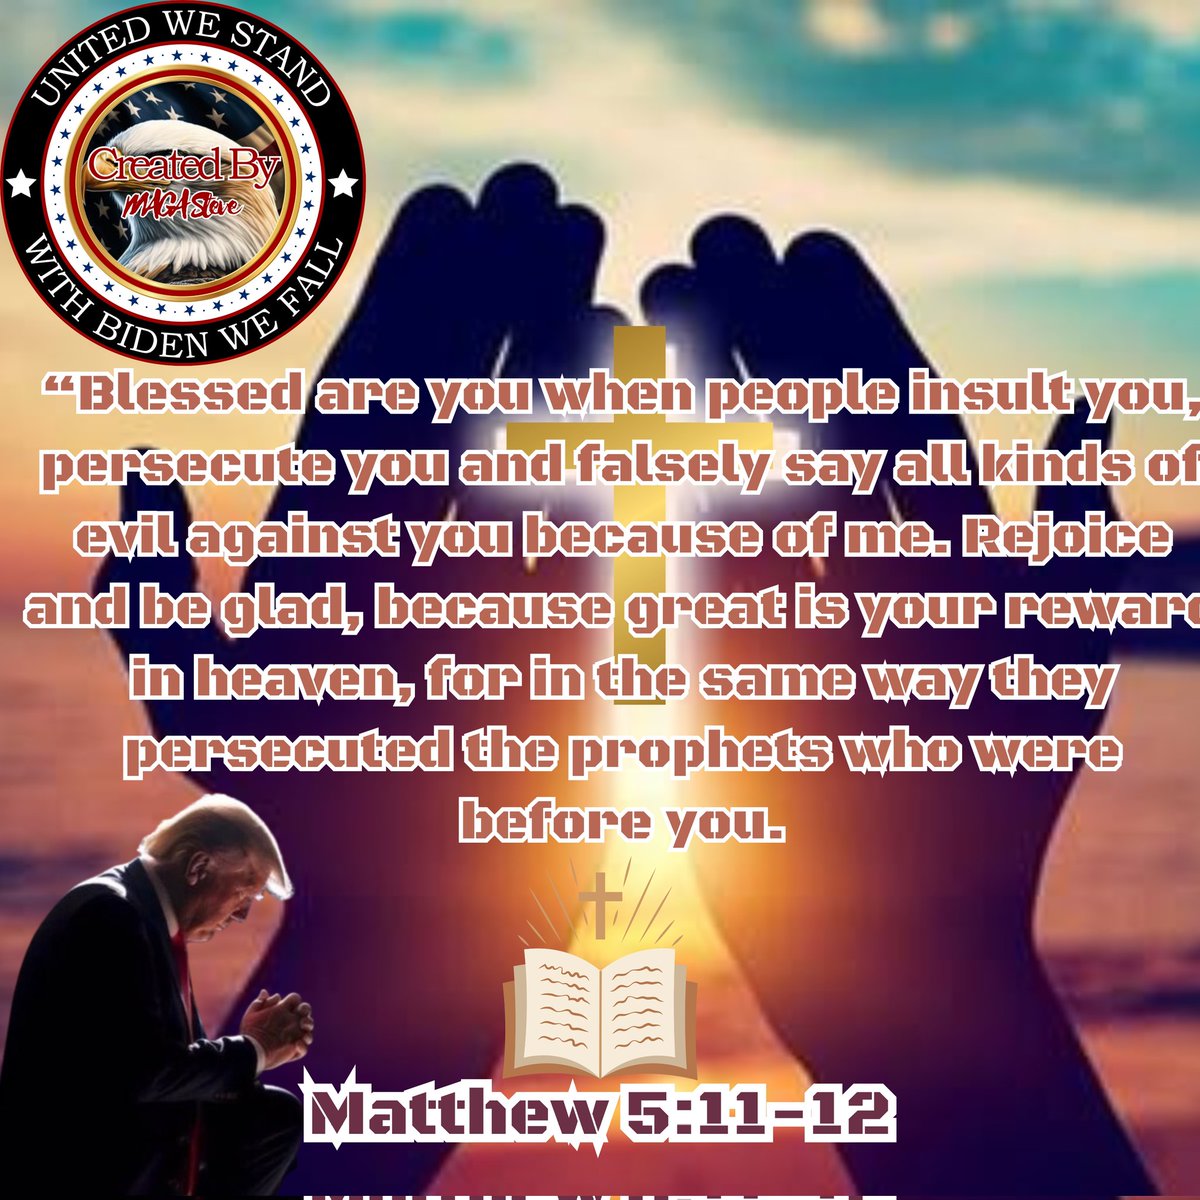 #UnitedPatriots 
“Blessed are you when people insult you, persecute you and falsely say all kinds of evil against you because of me. Rejoice and be glad, because great is your reward in heaven, for in the same way they persecuted the prophets who were before you.'
👇
⛪Matthew